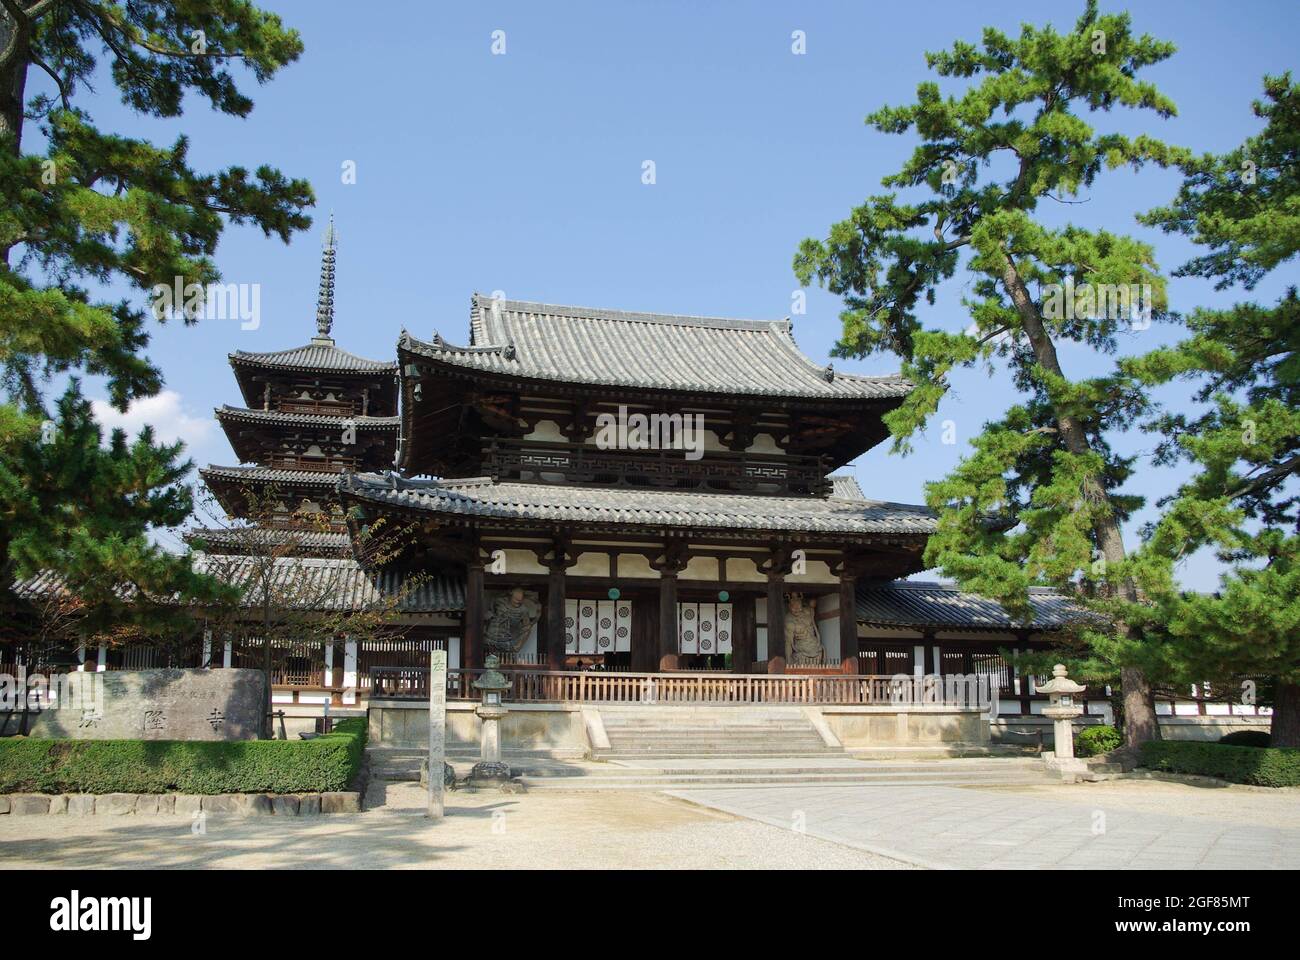 The Central Gate (chumon) of the Western Precinct of Horyuji Temple, Nara Prefecture Japan Stock Photo